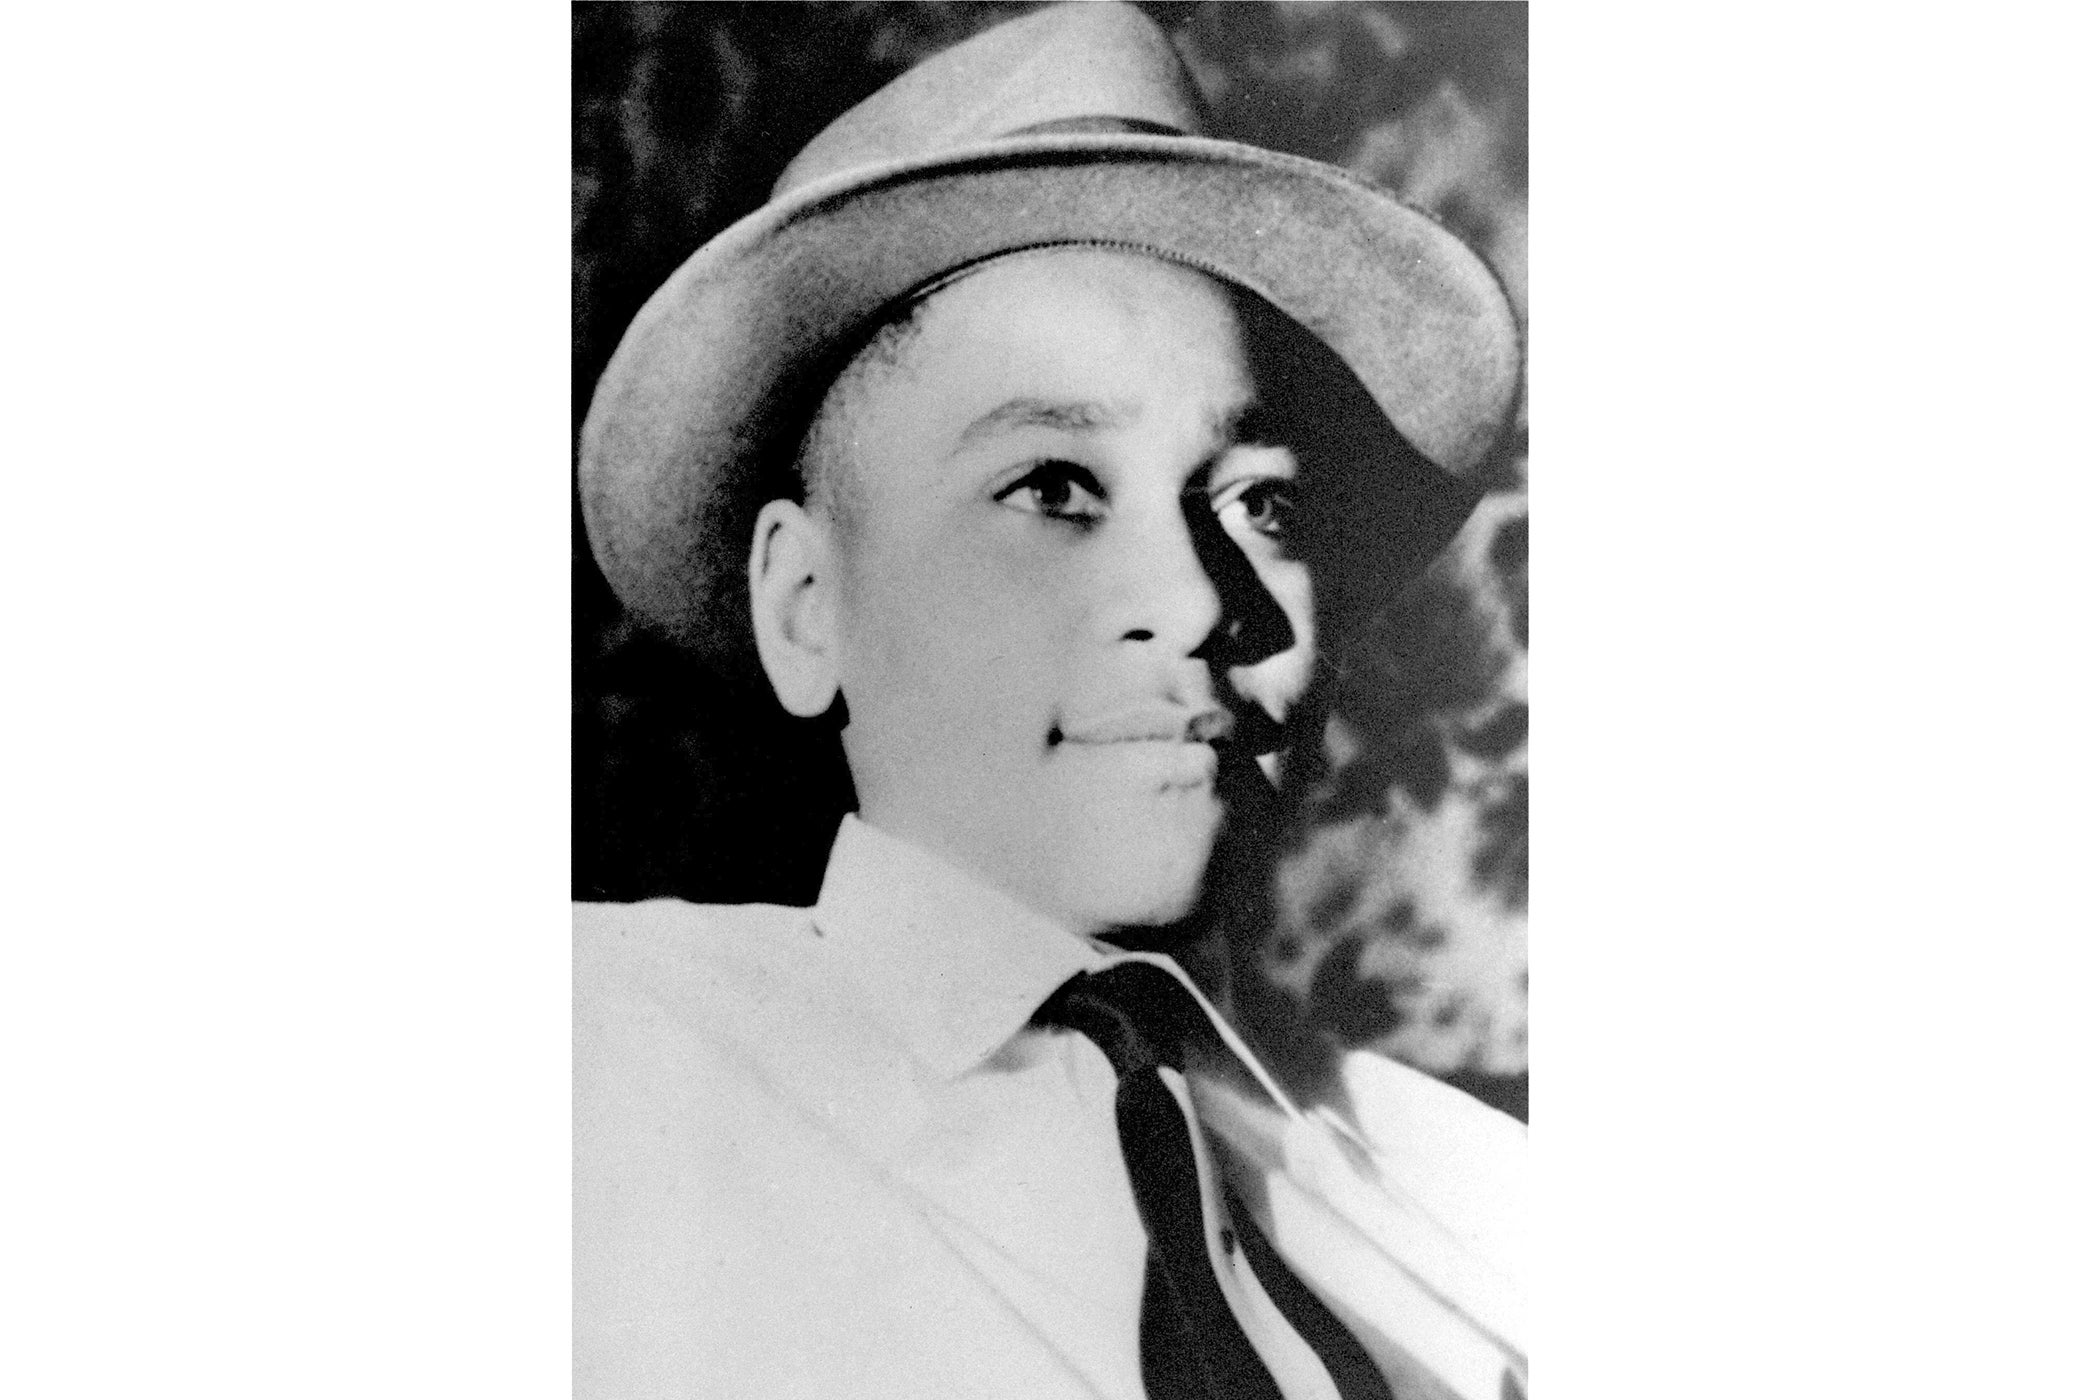 Emmett Till was 14 when he was brutally murdered in 1955 in Mississippi after being accused of whistling at a white woman